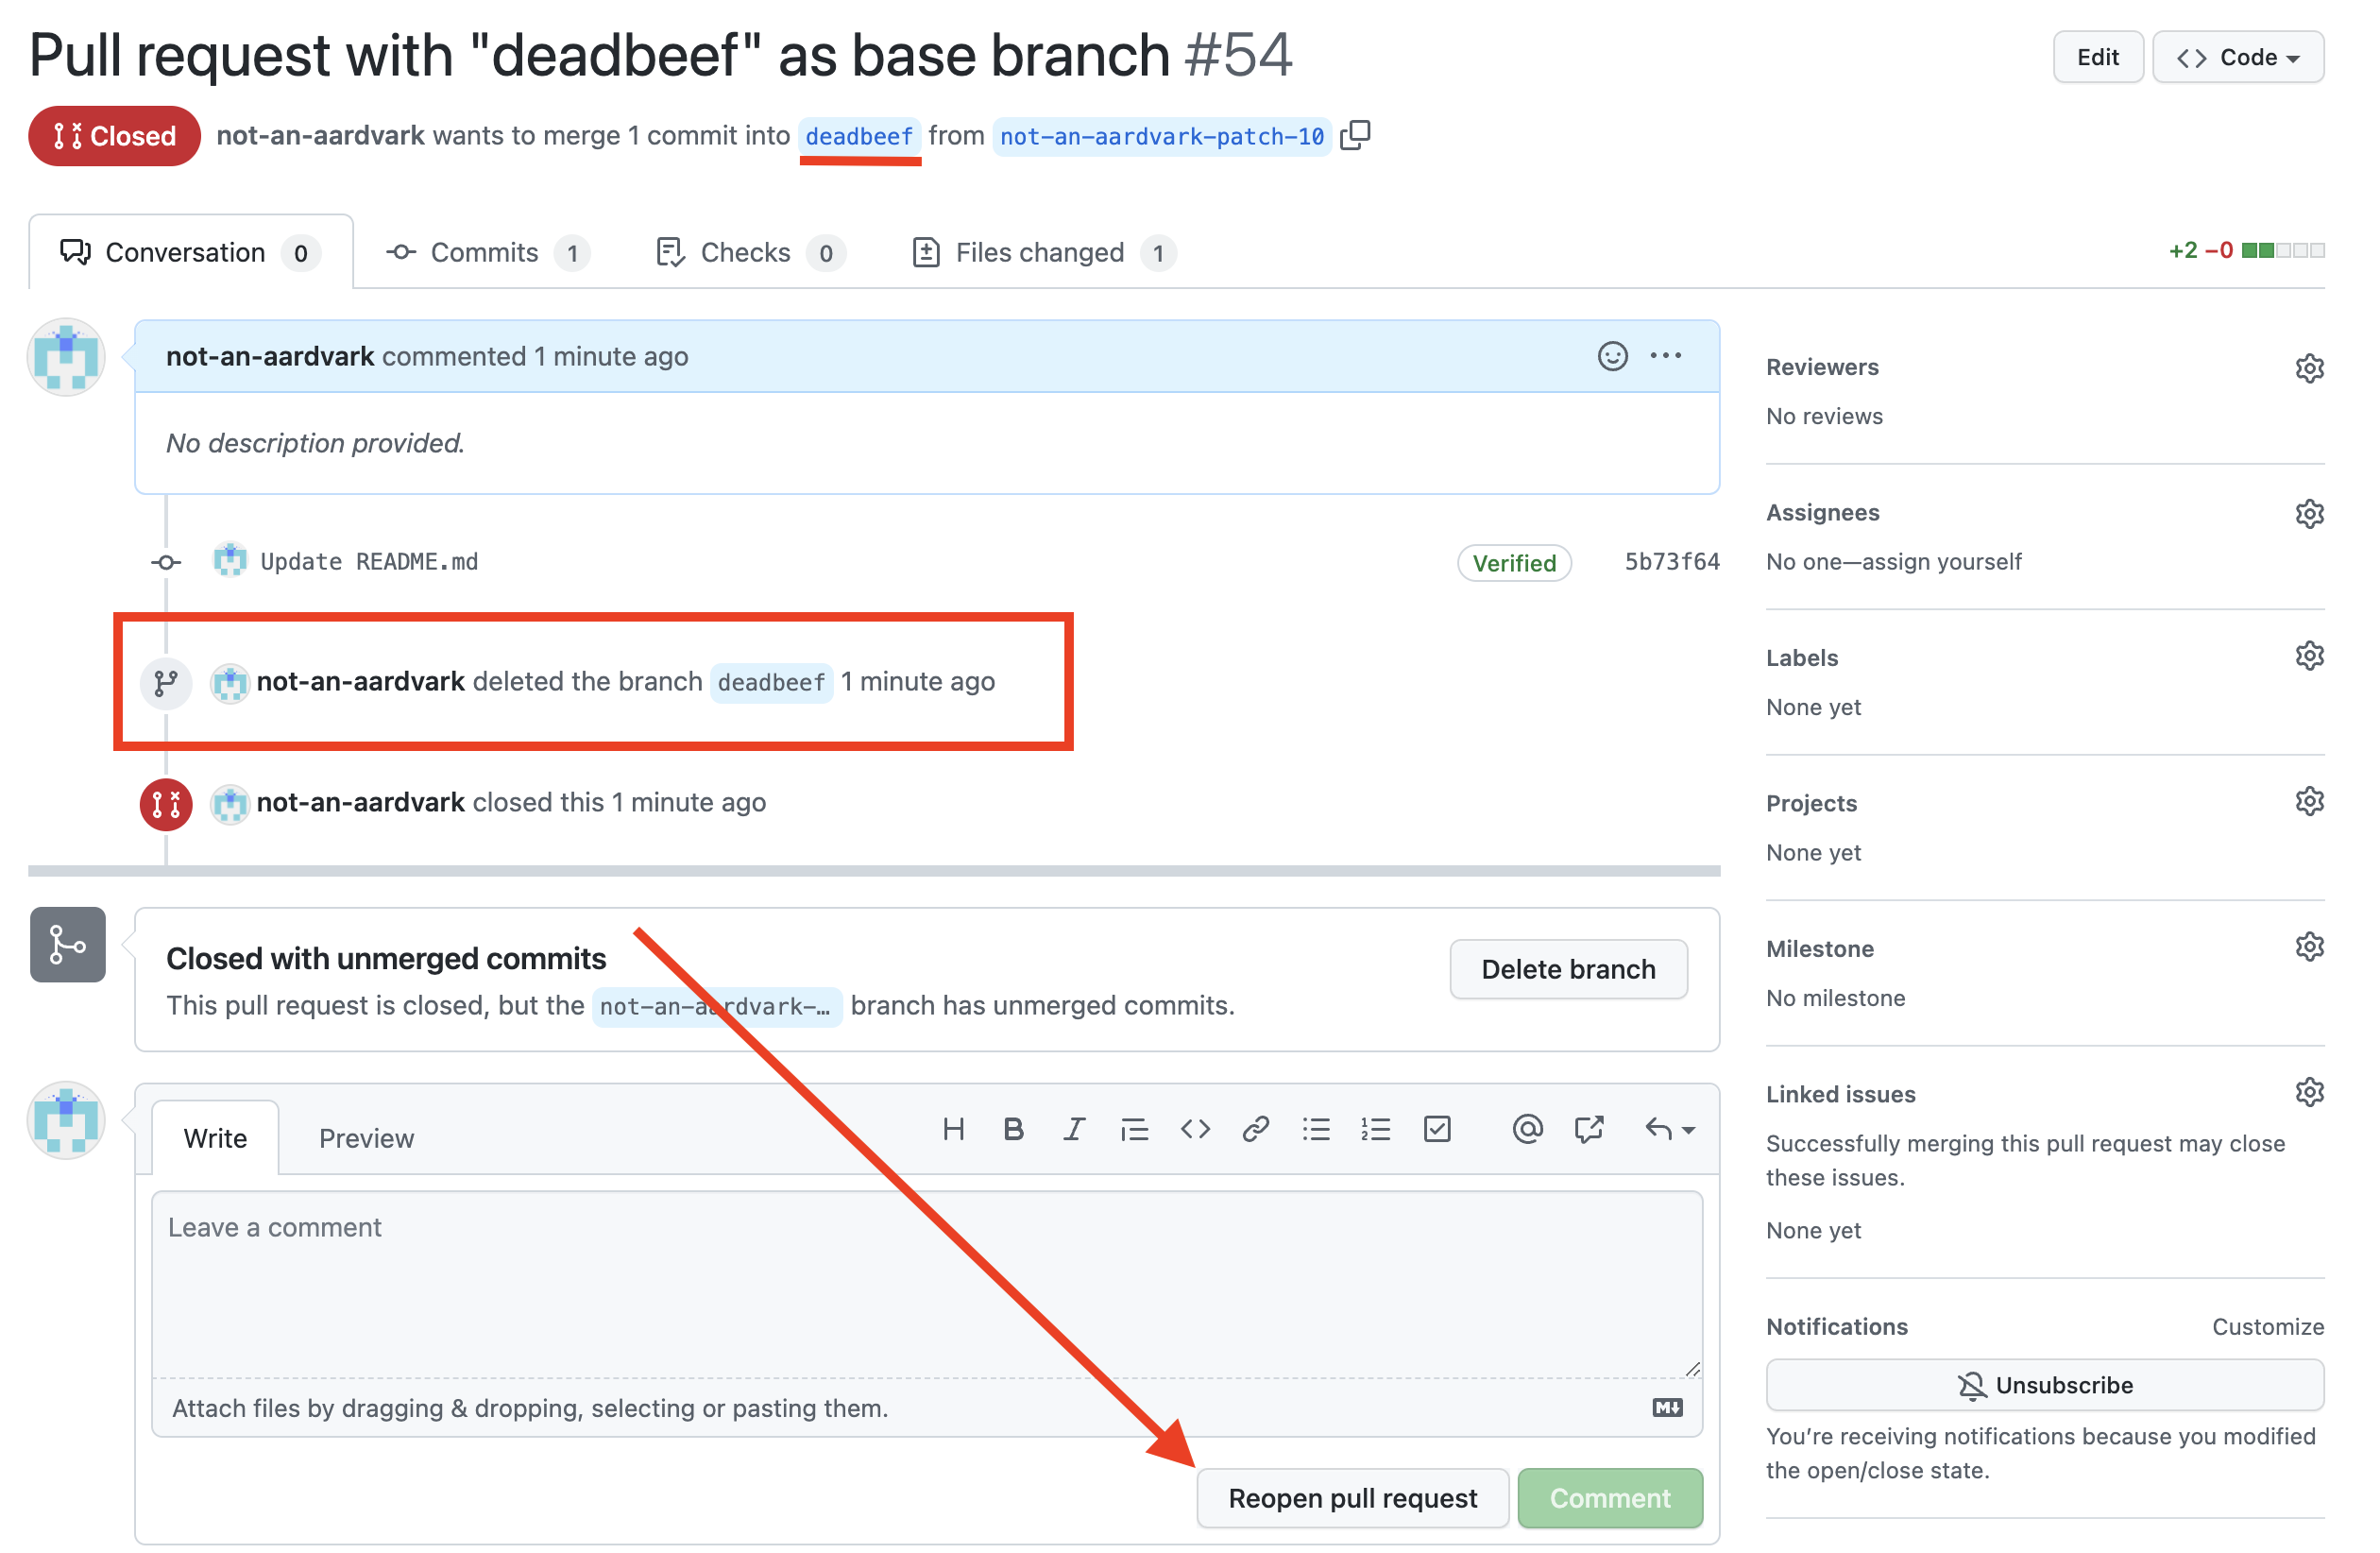 A screenshot of a GitHub pull request. The title of the pull request is 'Pull request with "deadbeef" as base branch'. The pull request is closed. Underneath the title, some text about the pull request is shown: "not-an-aardvark wants to merge 1 commit into deadbeef from not-an-aardvark-patch-10". The screenshot has been annotated to underline the word "deadbeef" in this text. Further down on the page, a historical timeline for this pull request is shown. The first timeline entry says, "not-an-aardvark deleted the branch 'deadbeef' one minute ago". The screenshot has been annotated to highlight this timeline event. Below it, another timeline event about the pull request is shown: "not-an-aardvark closed this 1 minute ago". At the bottom of the screenshot, there is a button labeled "Reopen pull request". This button appears to be clickable, and the screenshot is annotated with a red arrow pointing at the button.